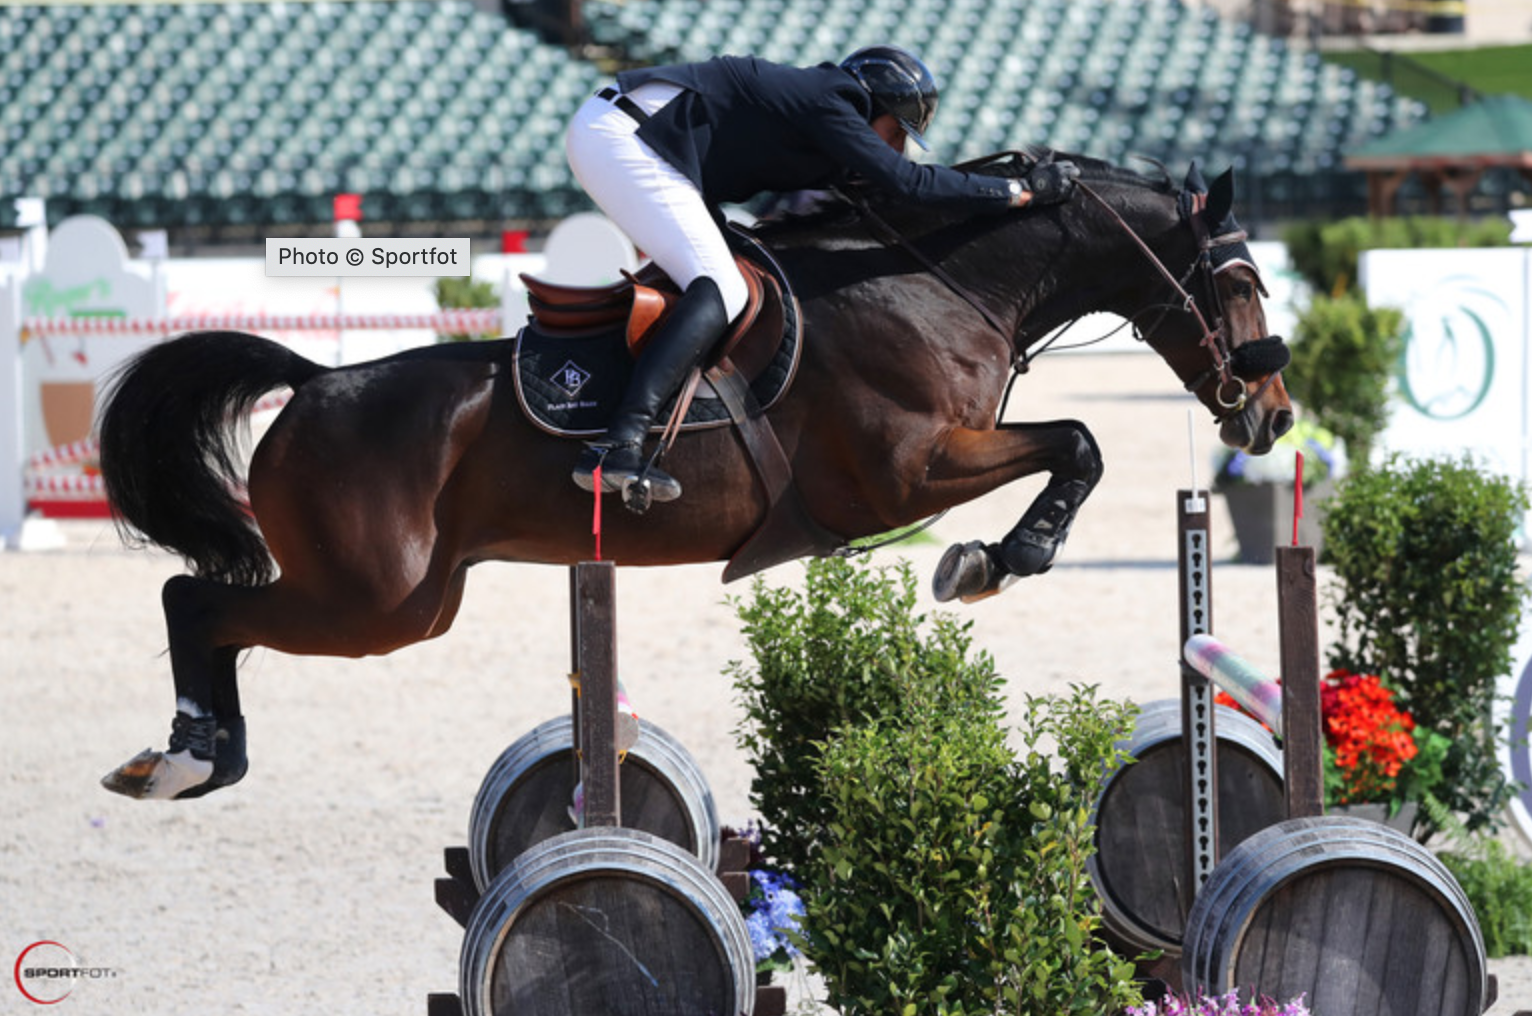 Tryon Fall 3 hat trick for Adam Prudent & Baloutinue with $73,000 Tryon Resort Grand Prix CSI2* win